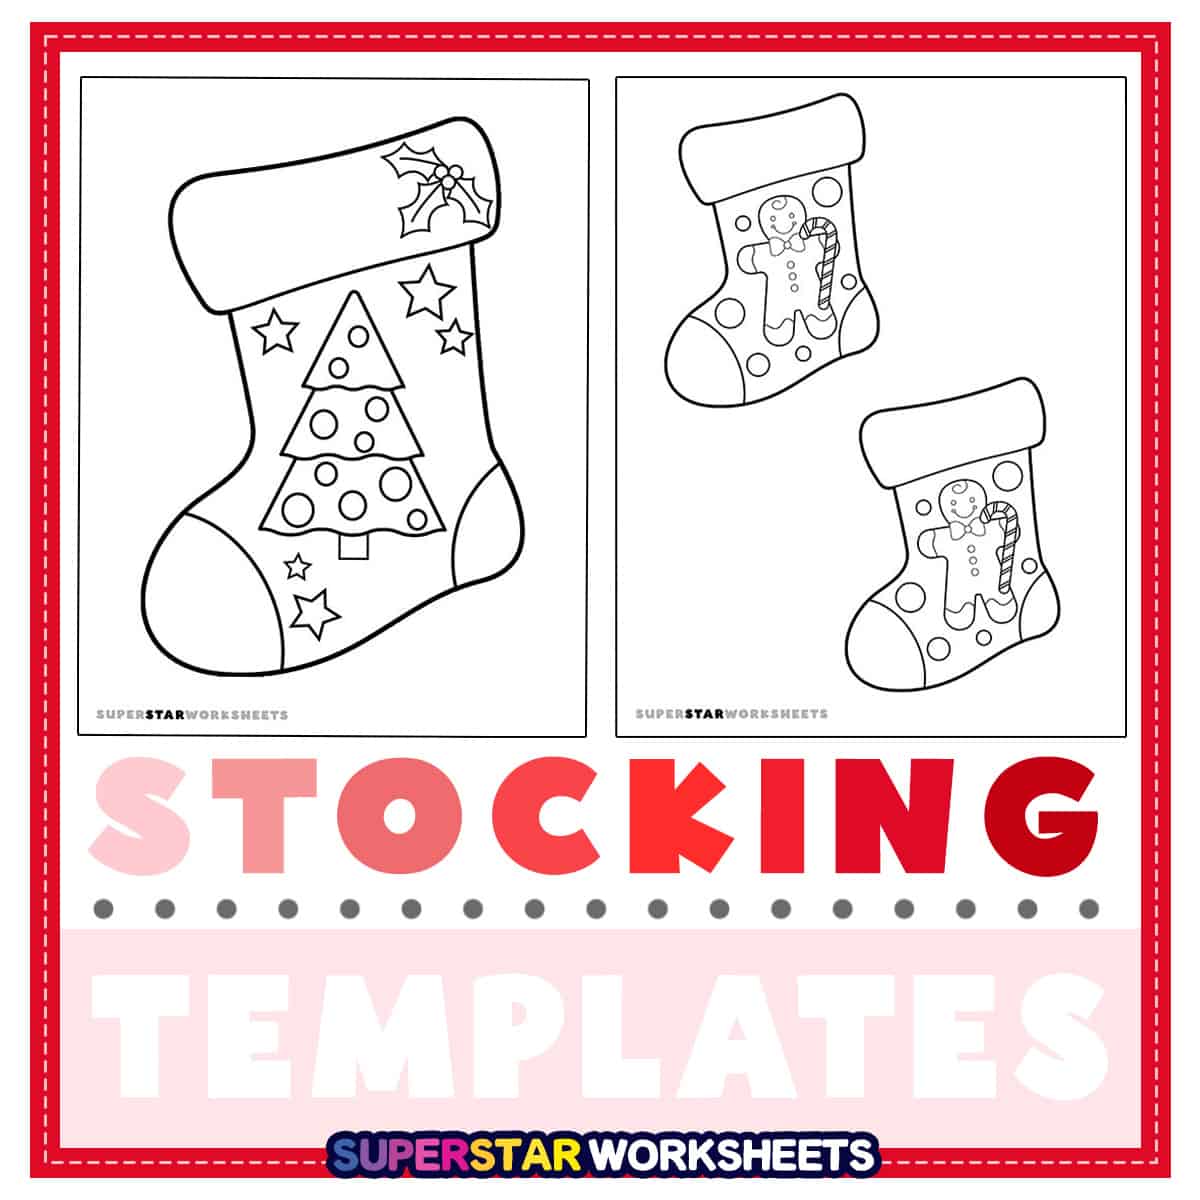 Christmas stocking templates showing students what types of designs are included in the pack.